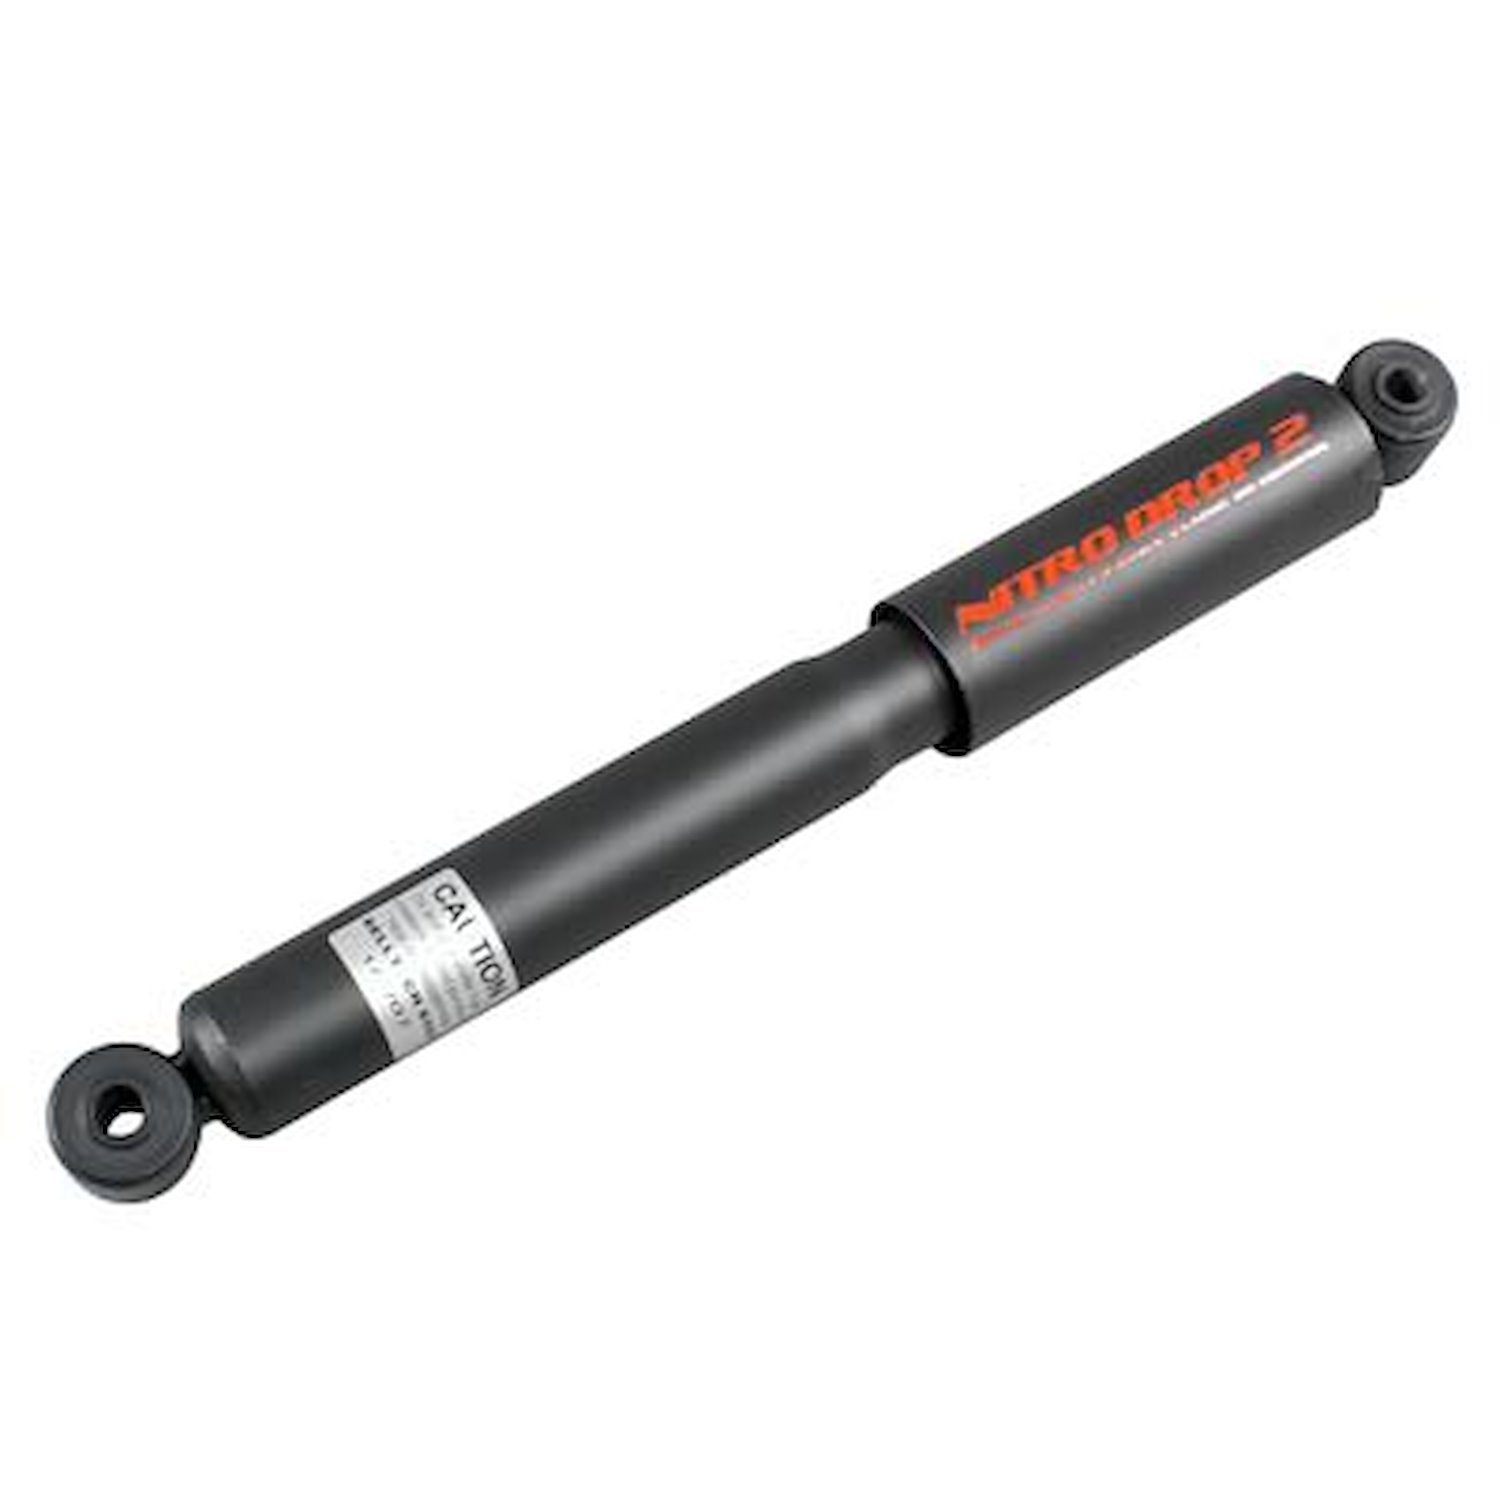 Street Performance Shock Set includes (2) 146-10101I Front Shocks and (2) 146-2210ID Rear Shocks